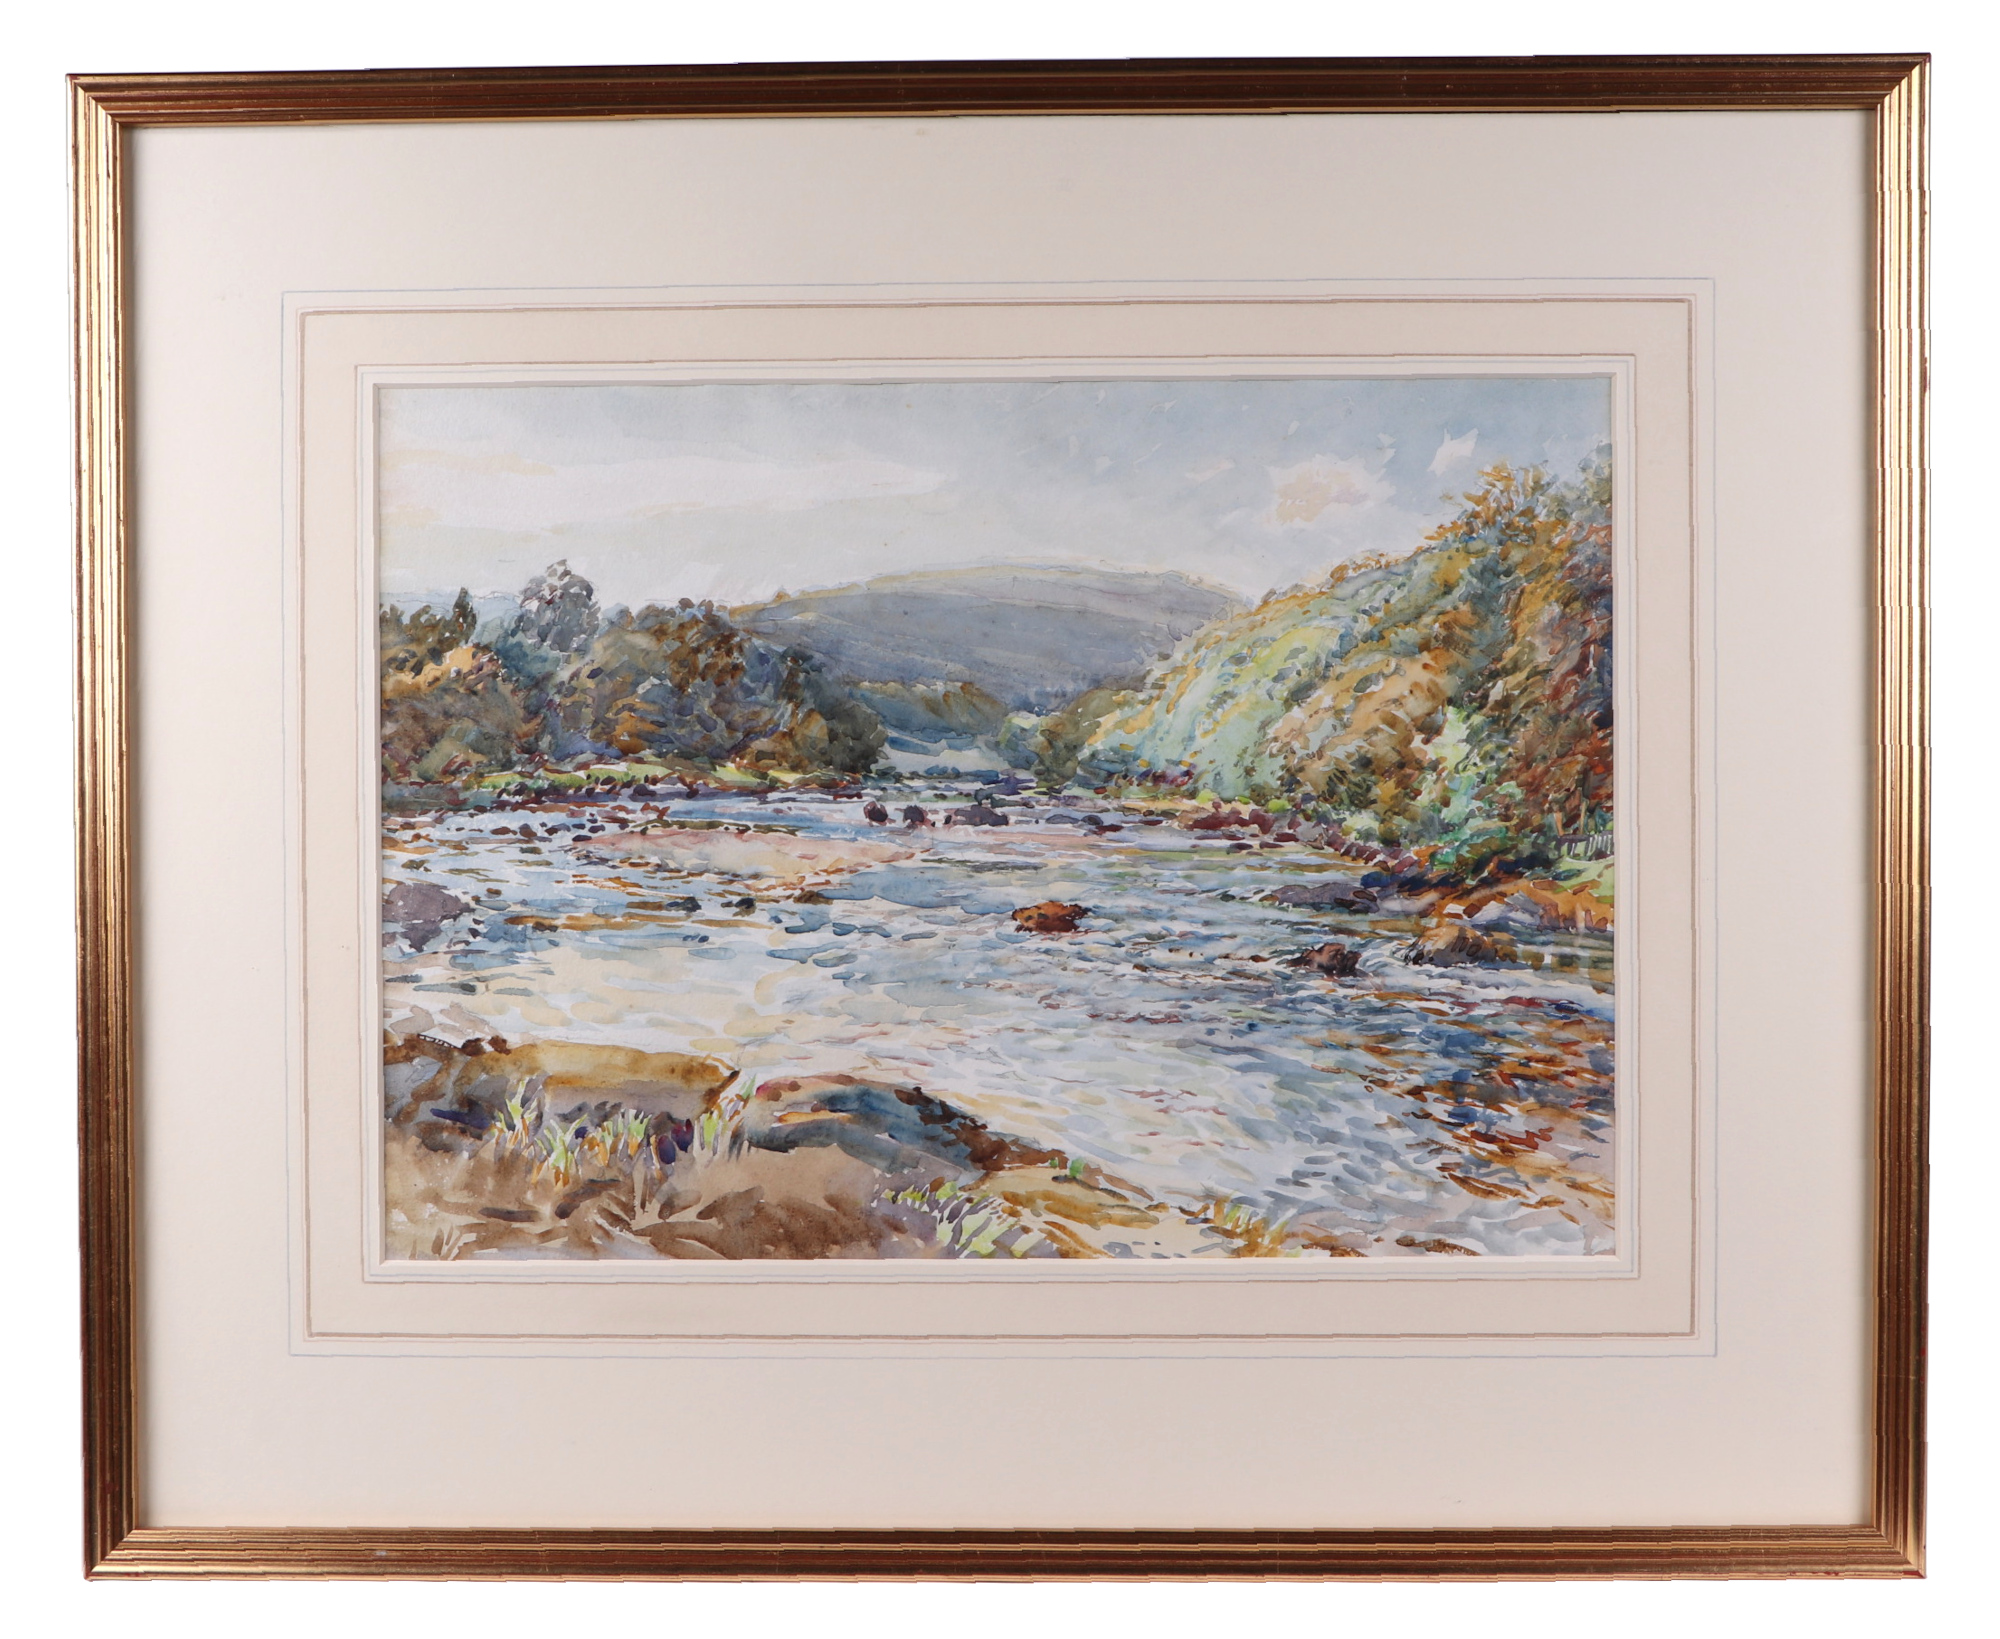 George Anderson (1856-1945), "On the Teign", watercolour, signed lower left, Swan Gallery label